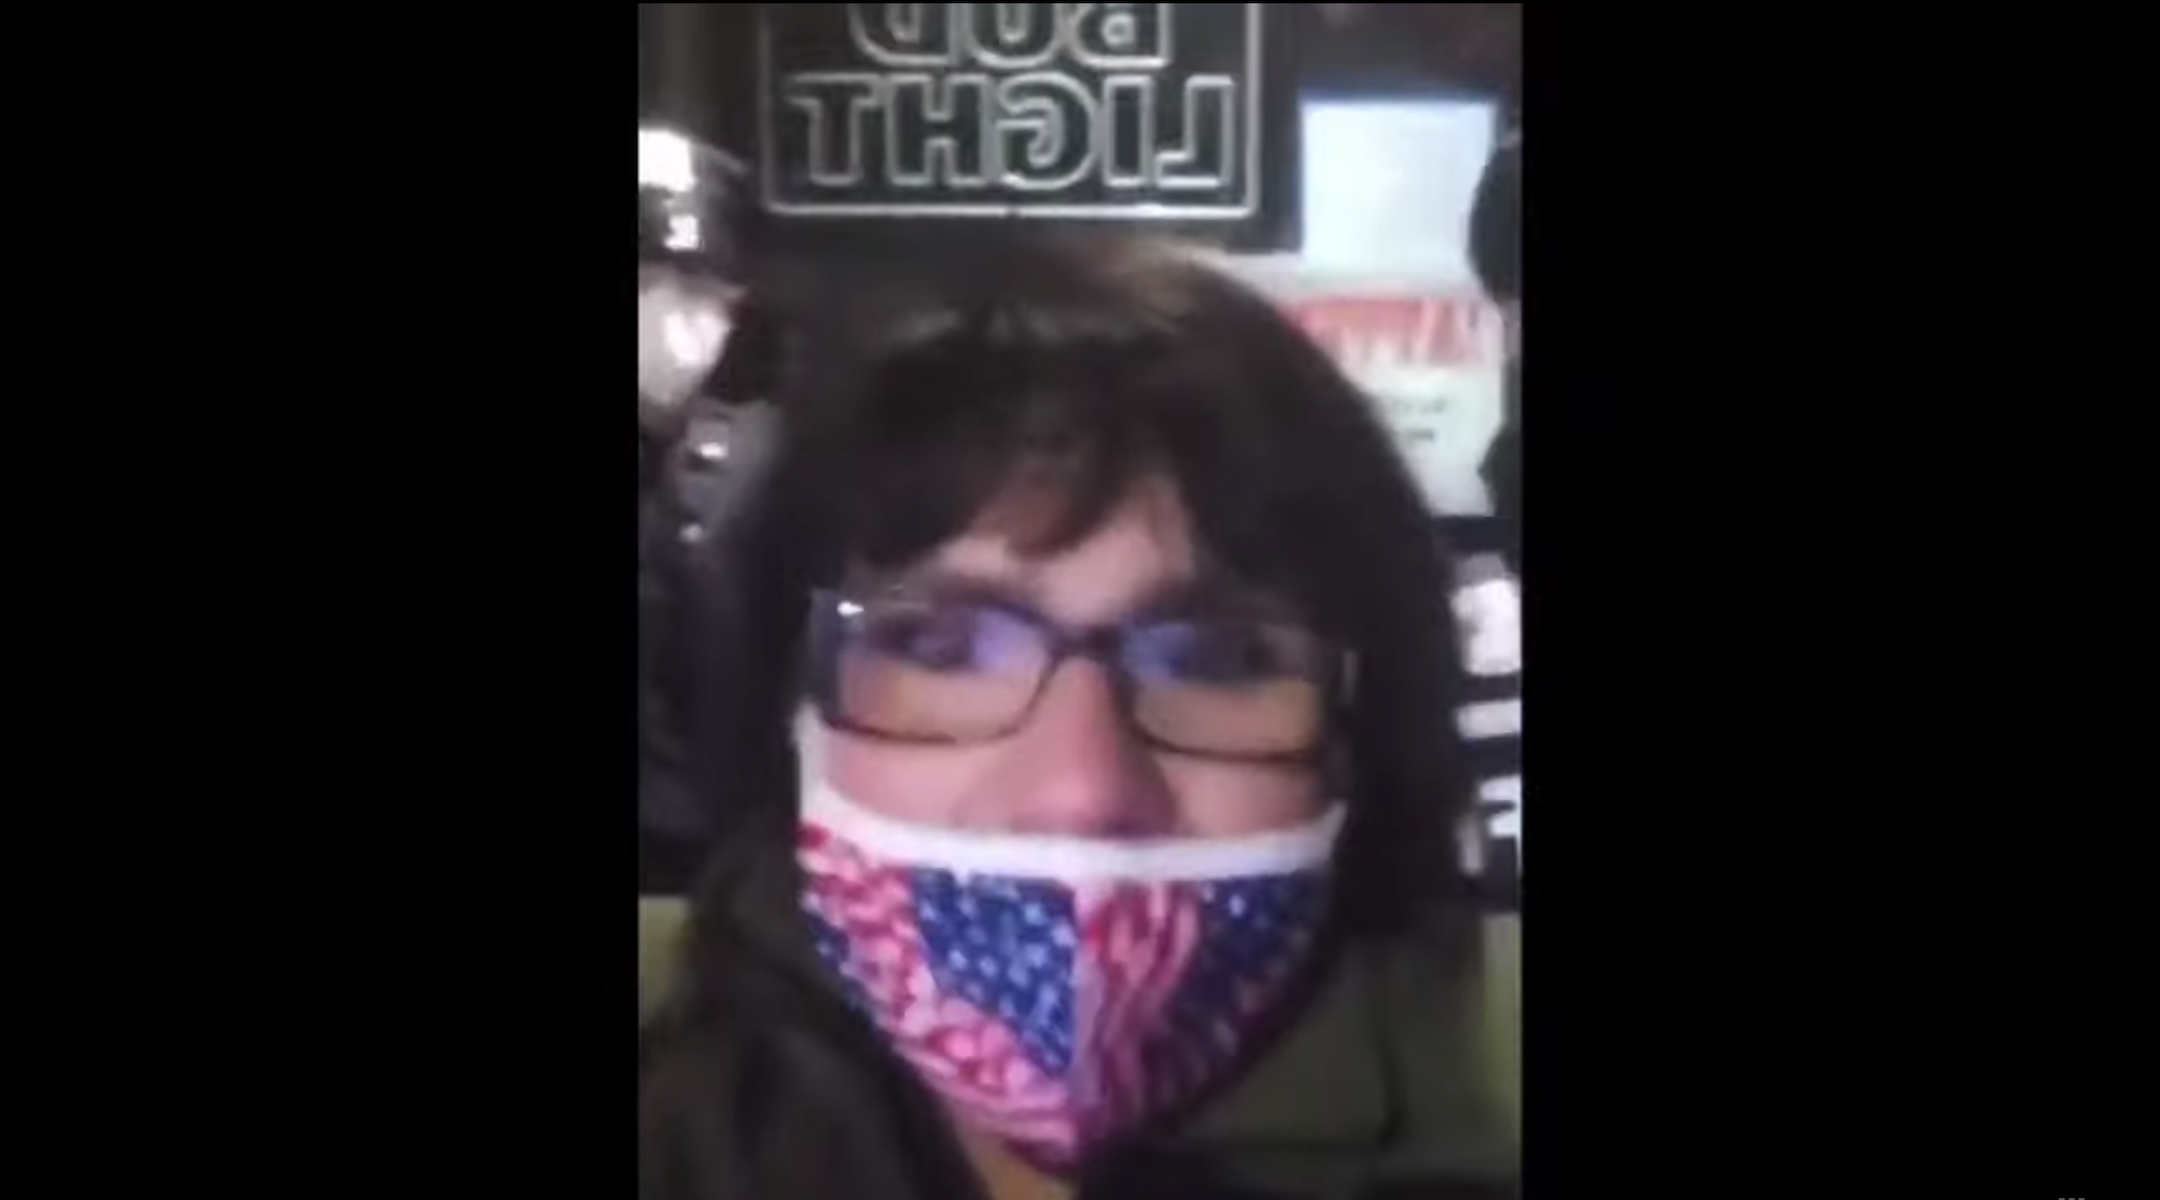 Staten Island Republican politician Leticia Remauro speaks to the camera during a December protest where she yelled "Heil Hitler." She has since apologized. (Screenshot)